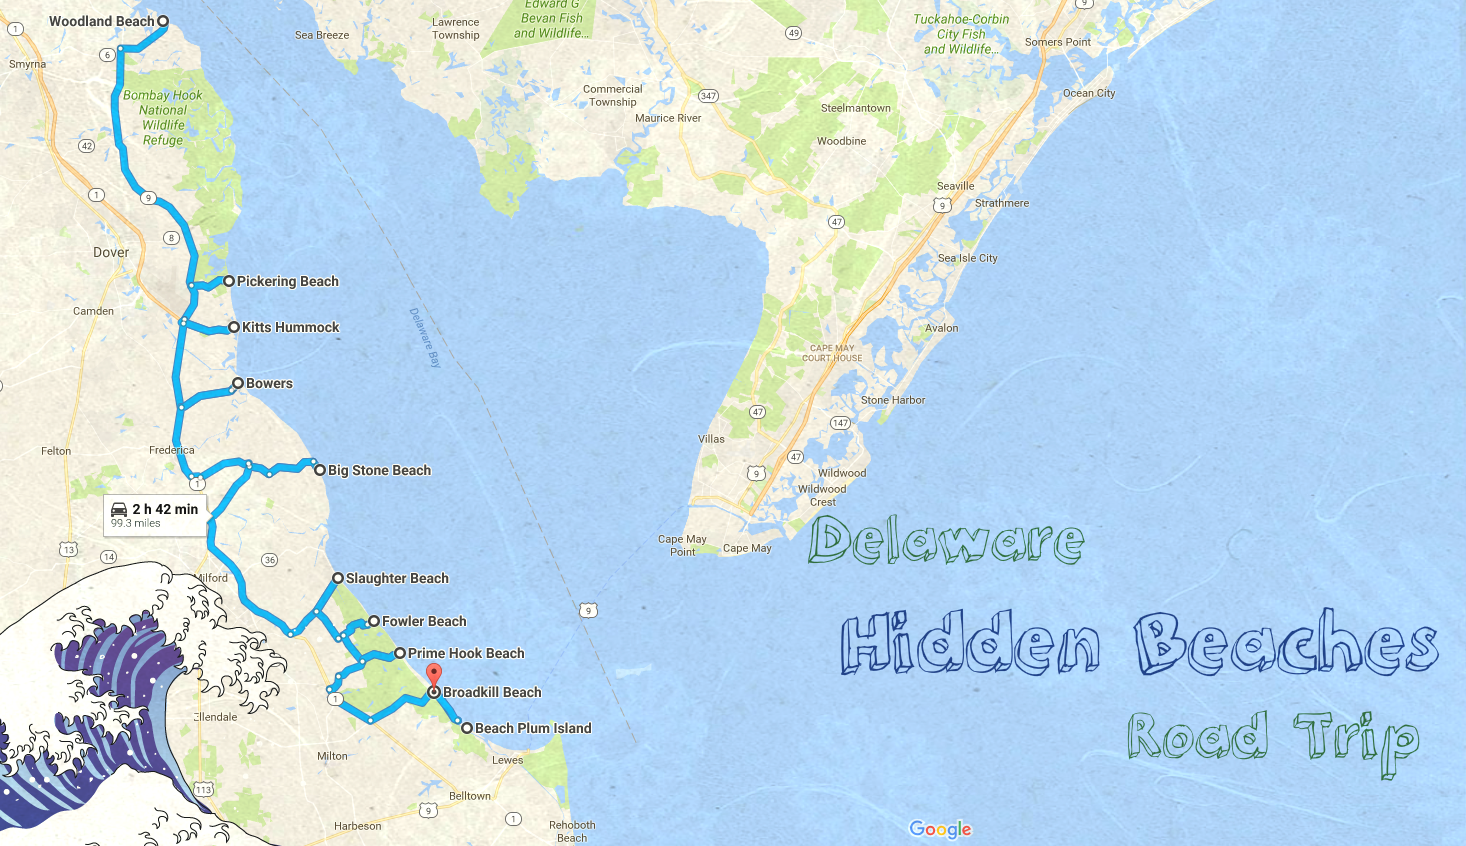 Take This Road Trip To 10 Hidden Beaches In Delaware